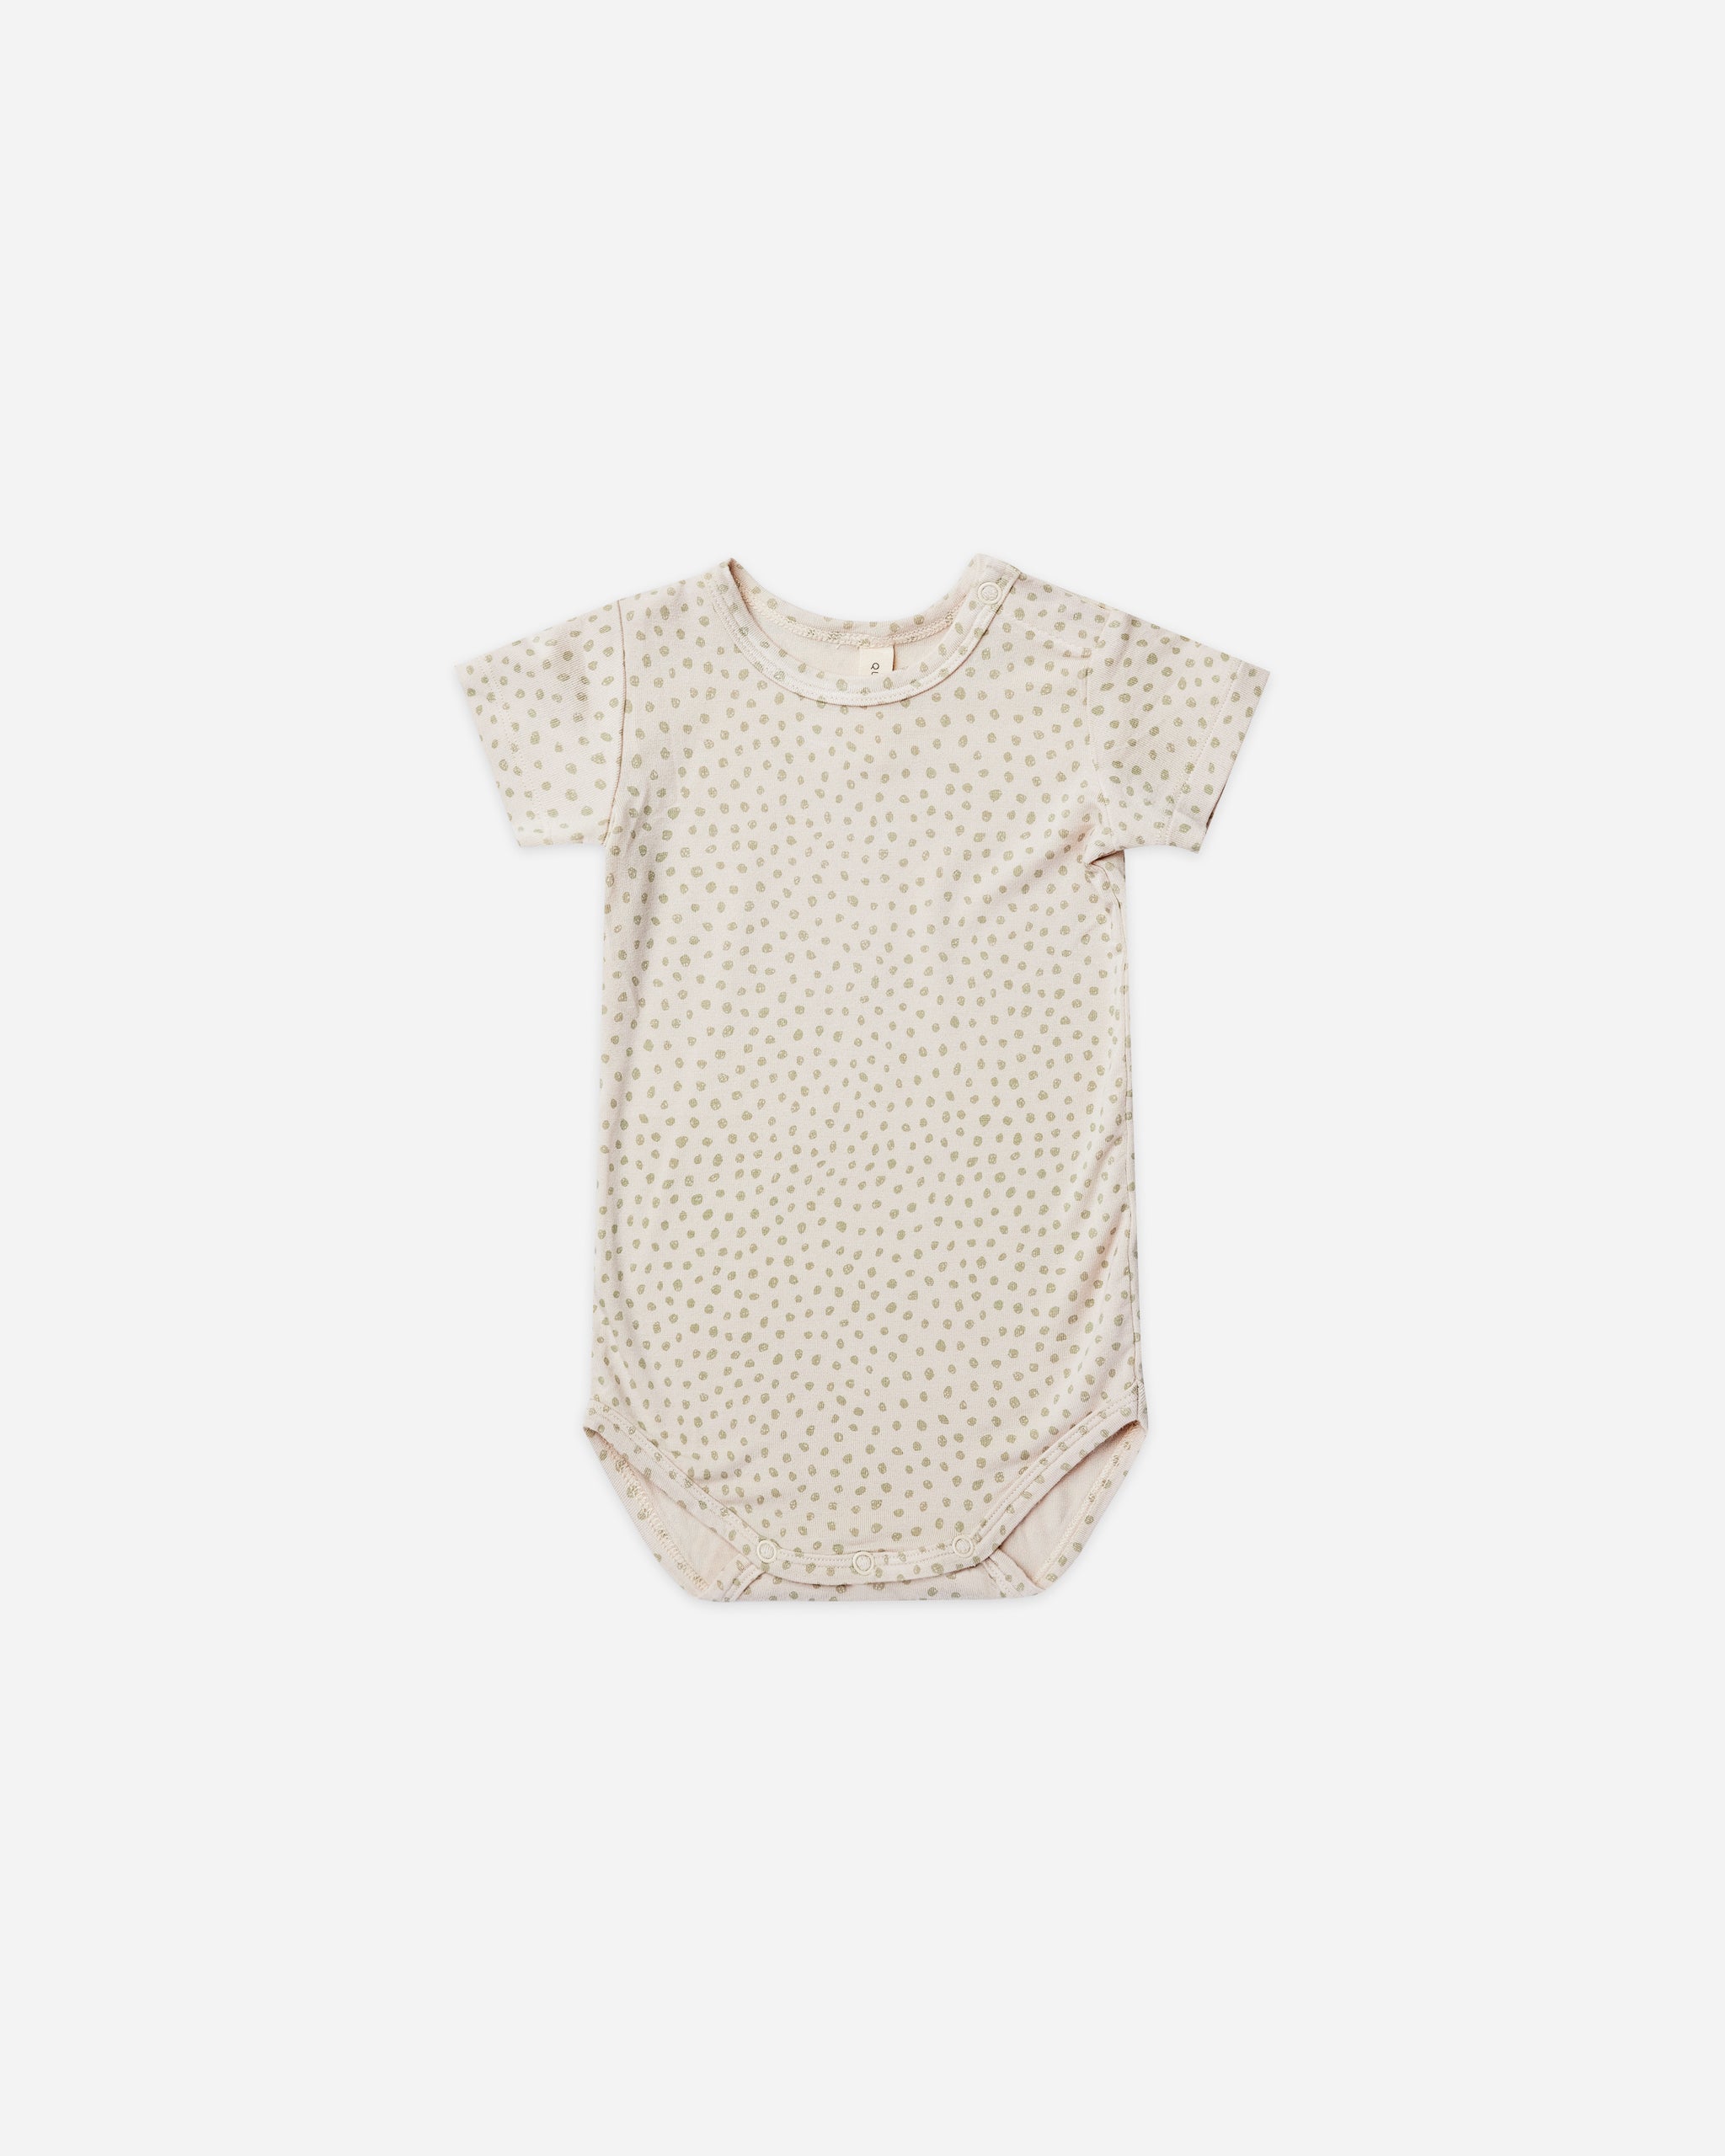 bamboo short sleeve bodysuit | speckles - Quincy Mae | Baby Basics | Baby Clothing | Organic Baby Clothes | Modern Baby Boy Clothes |